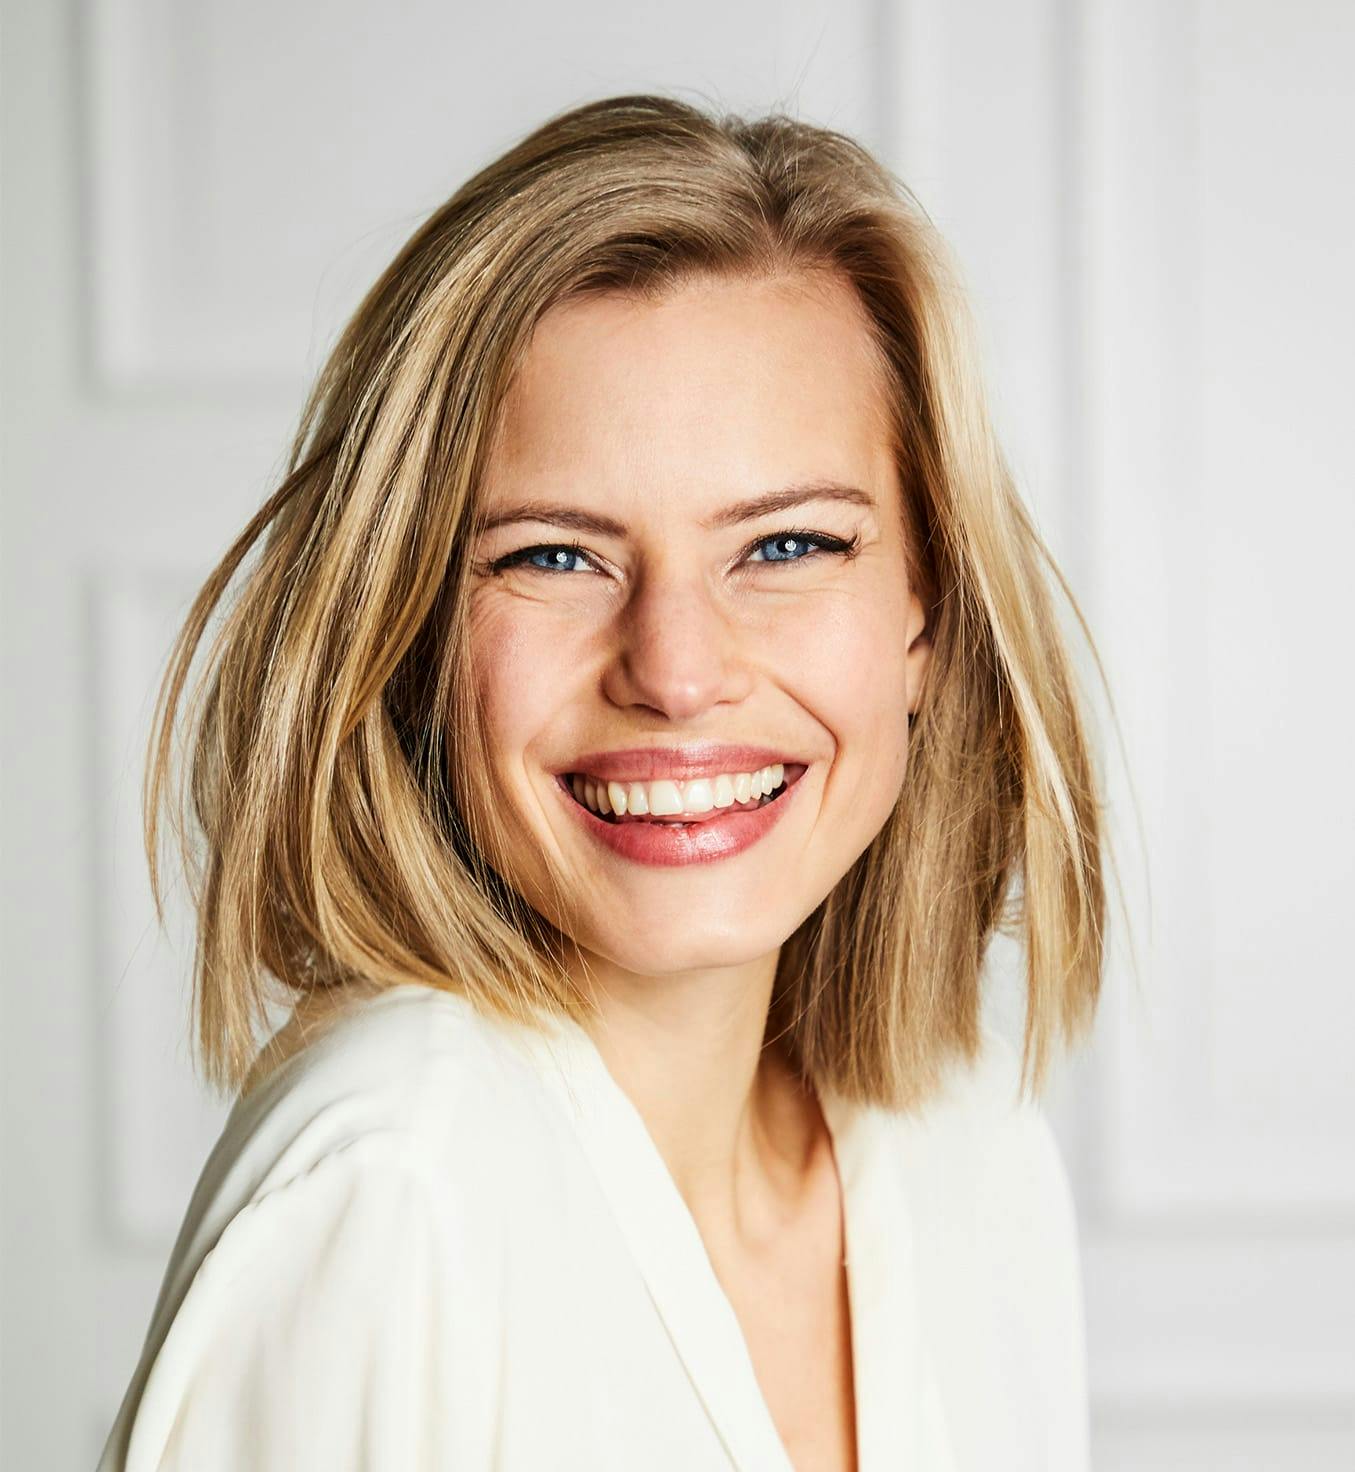 Woman with short blonde hair smiling